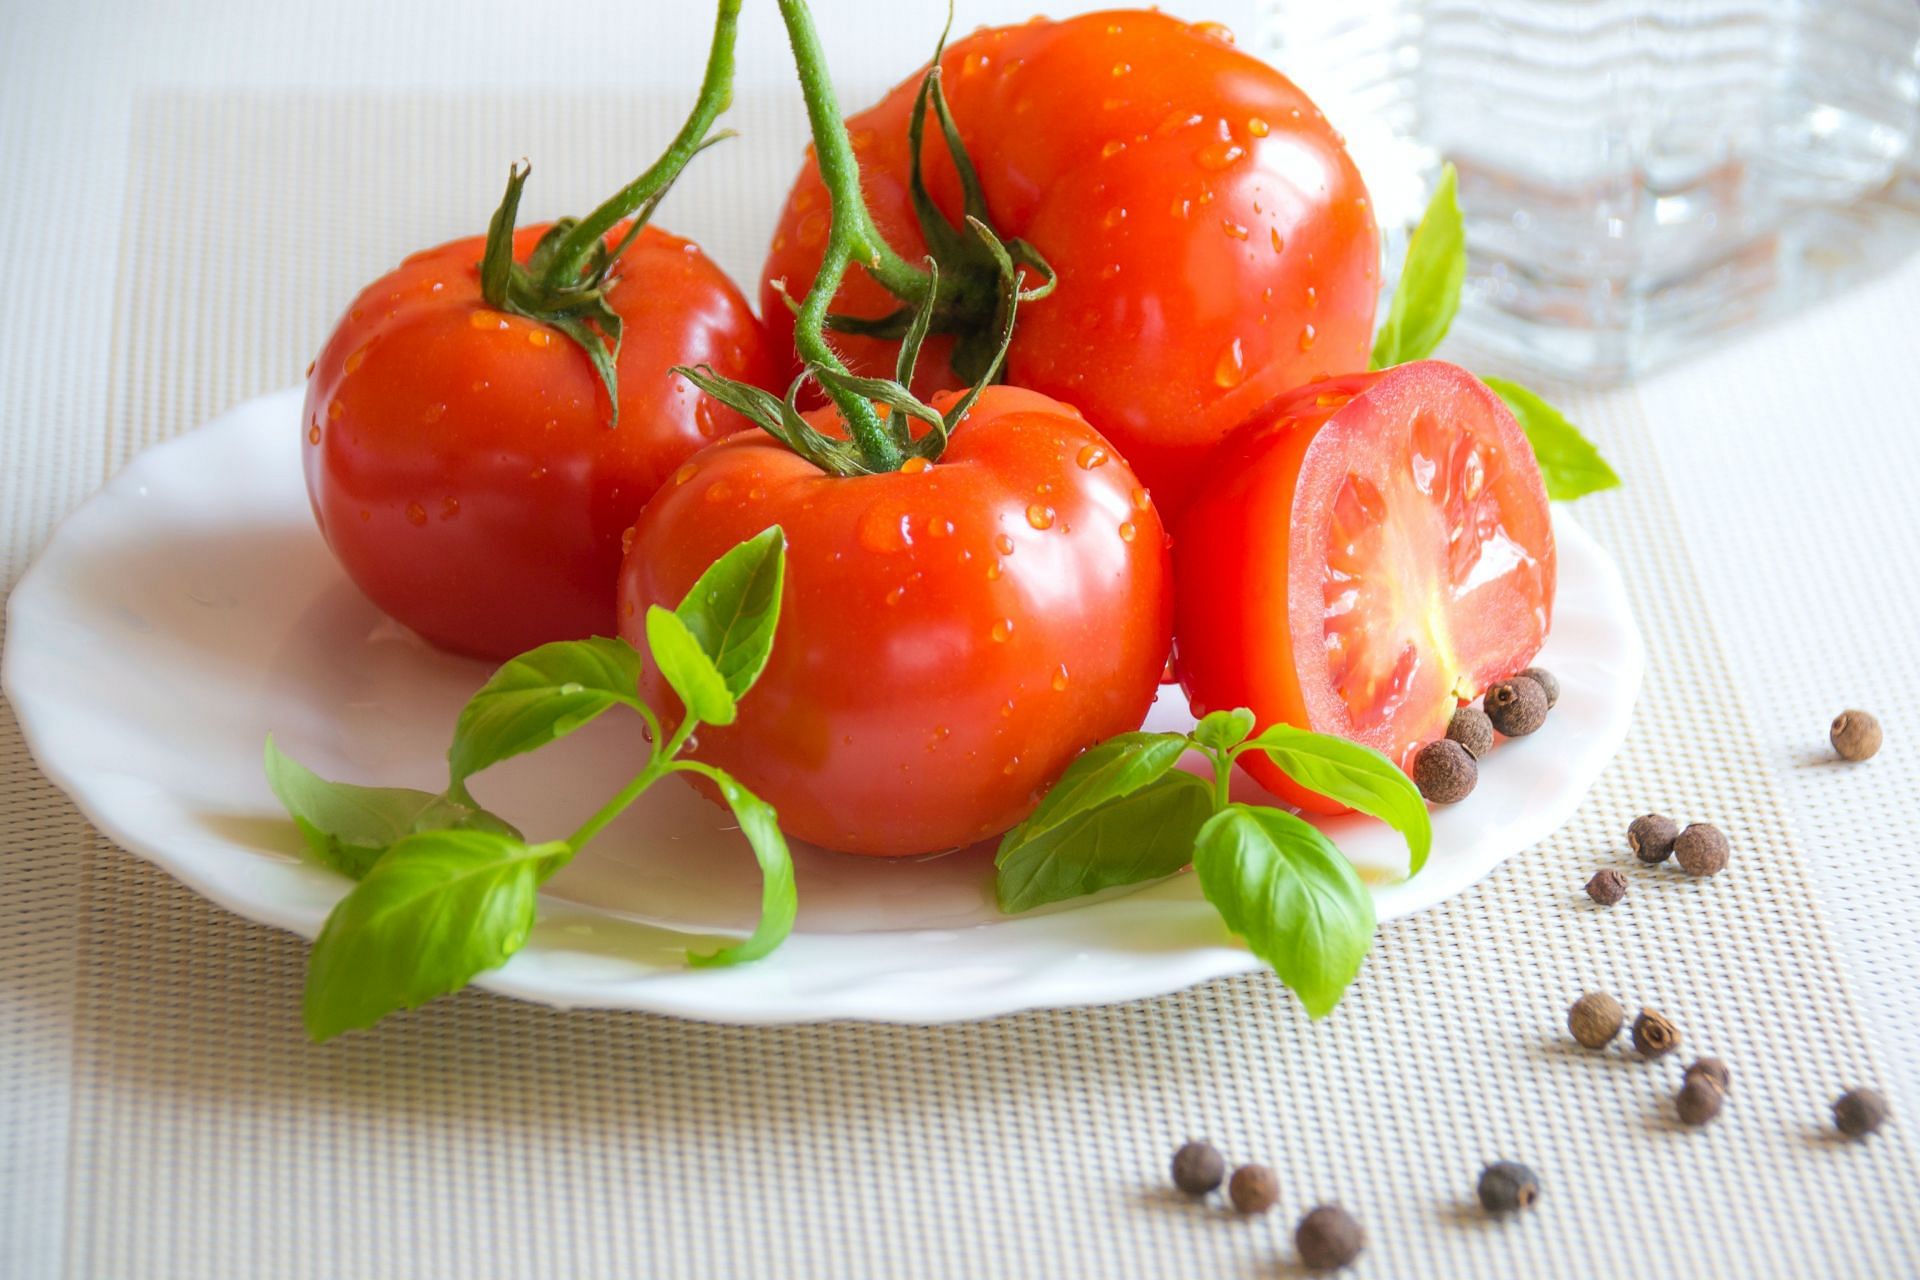 tomatoes help in booting immune system (image via pexels / photomix)